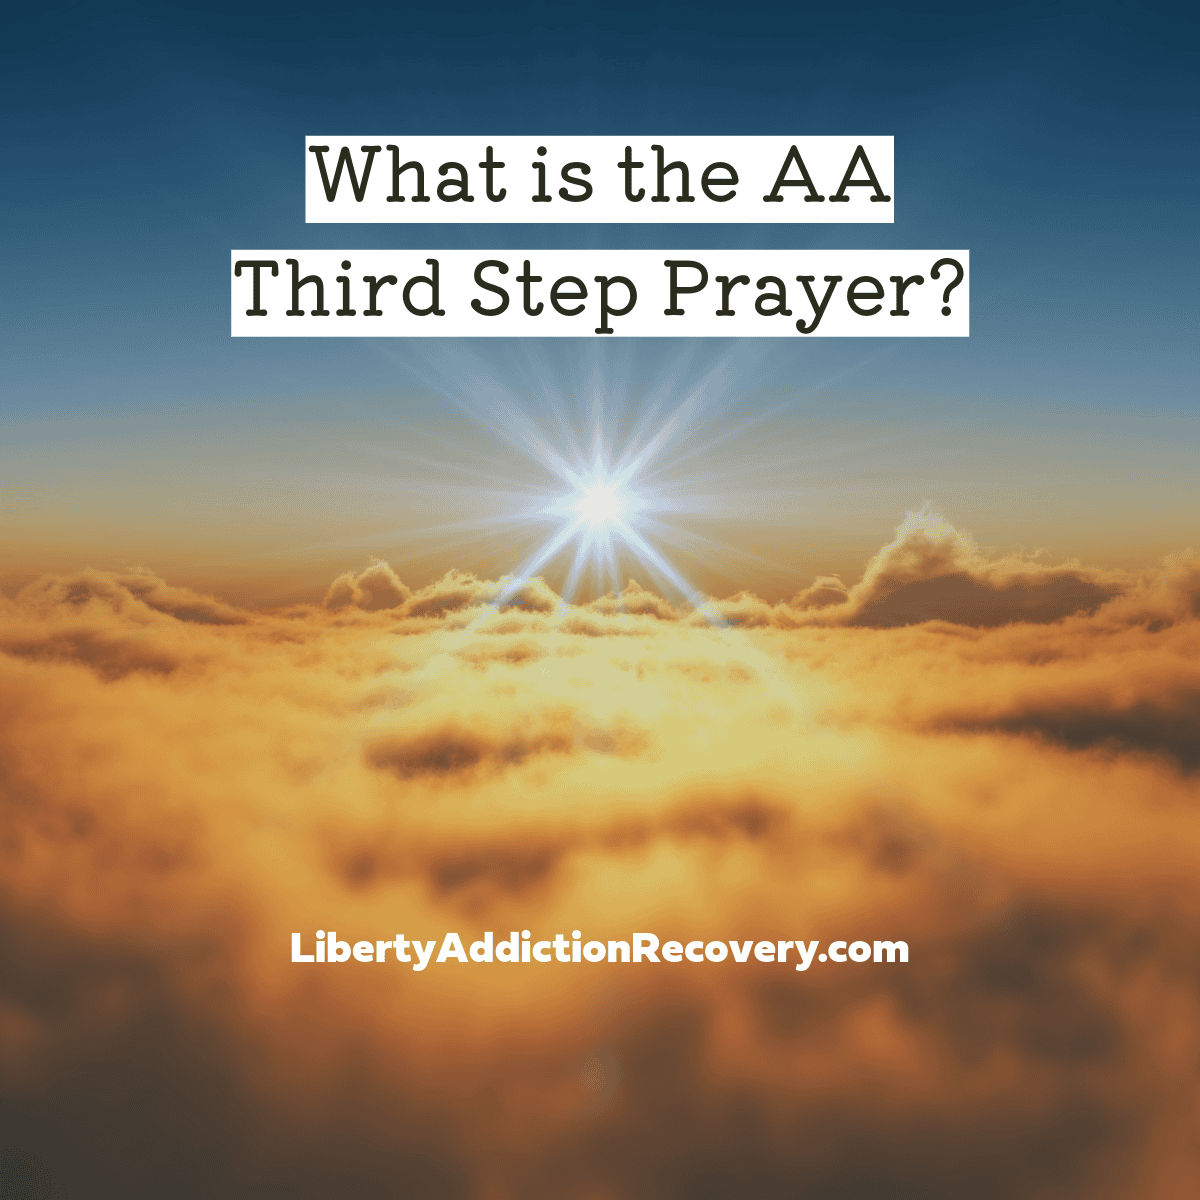 What is the AA Third Step Prayer in the big book